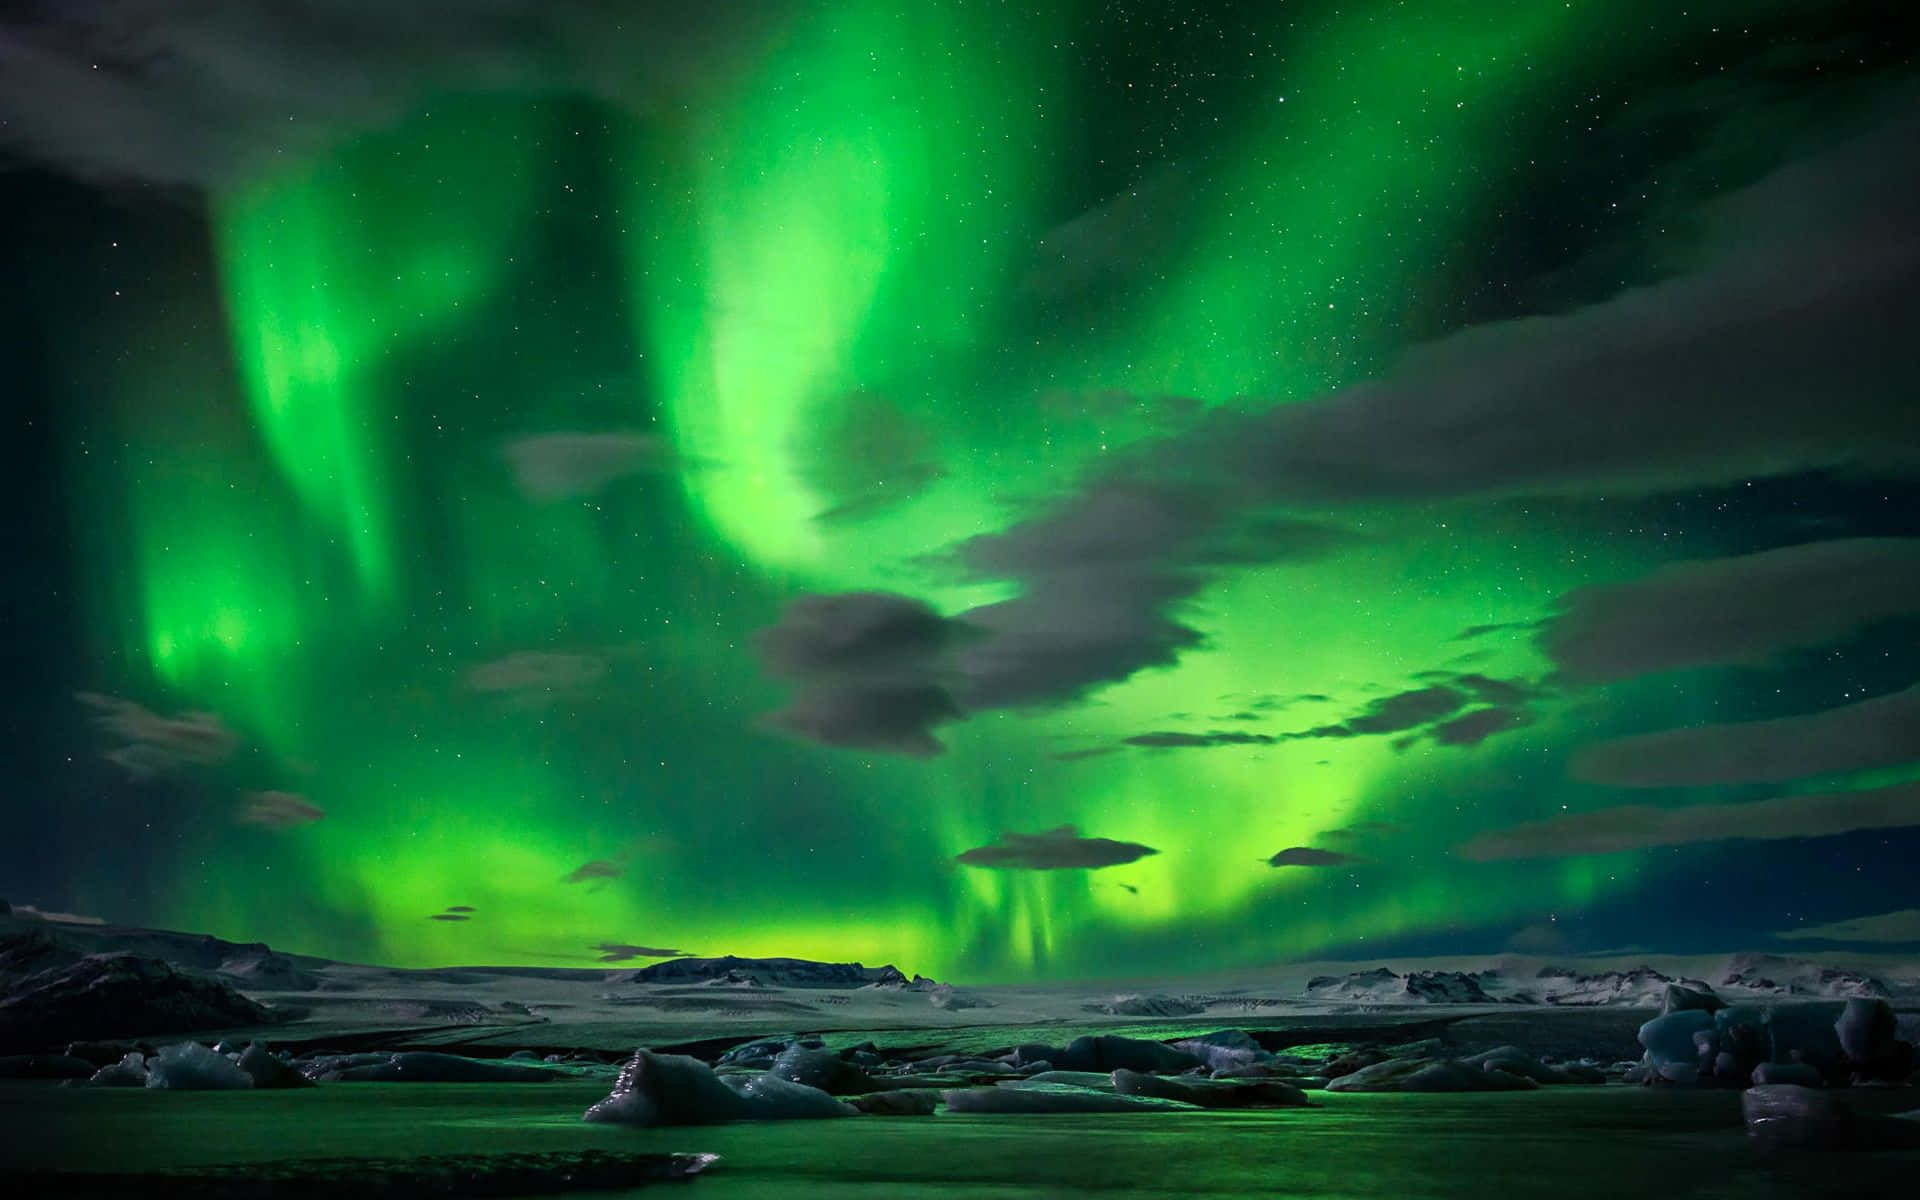 "The magical lights of the Northern Lights"